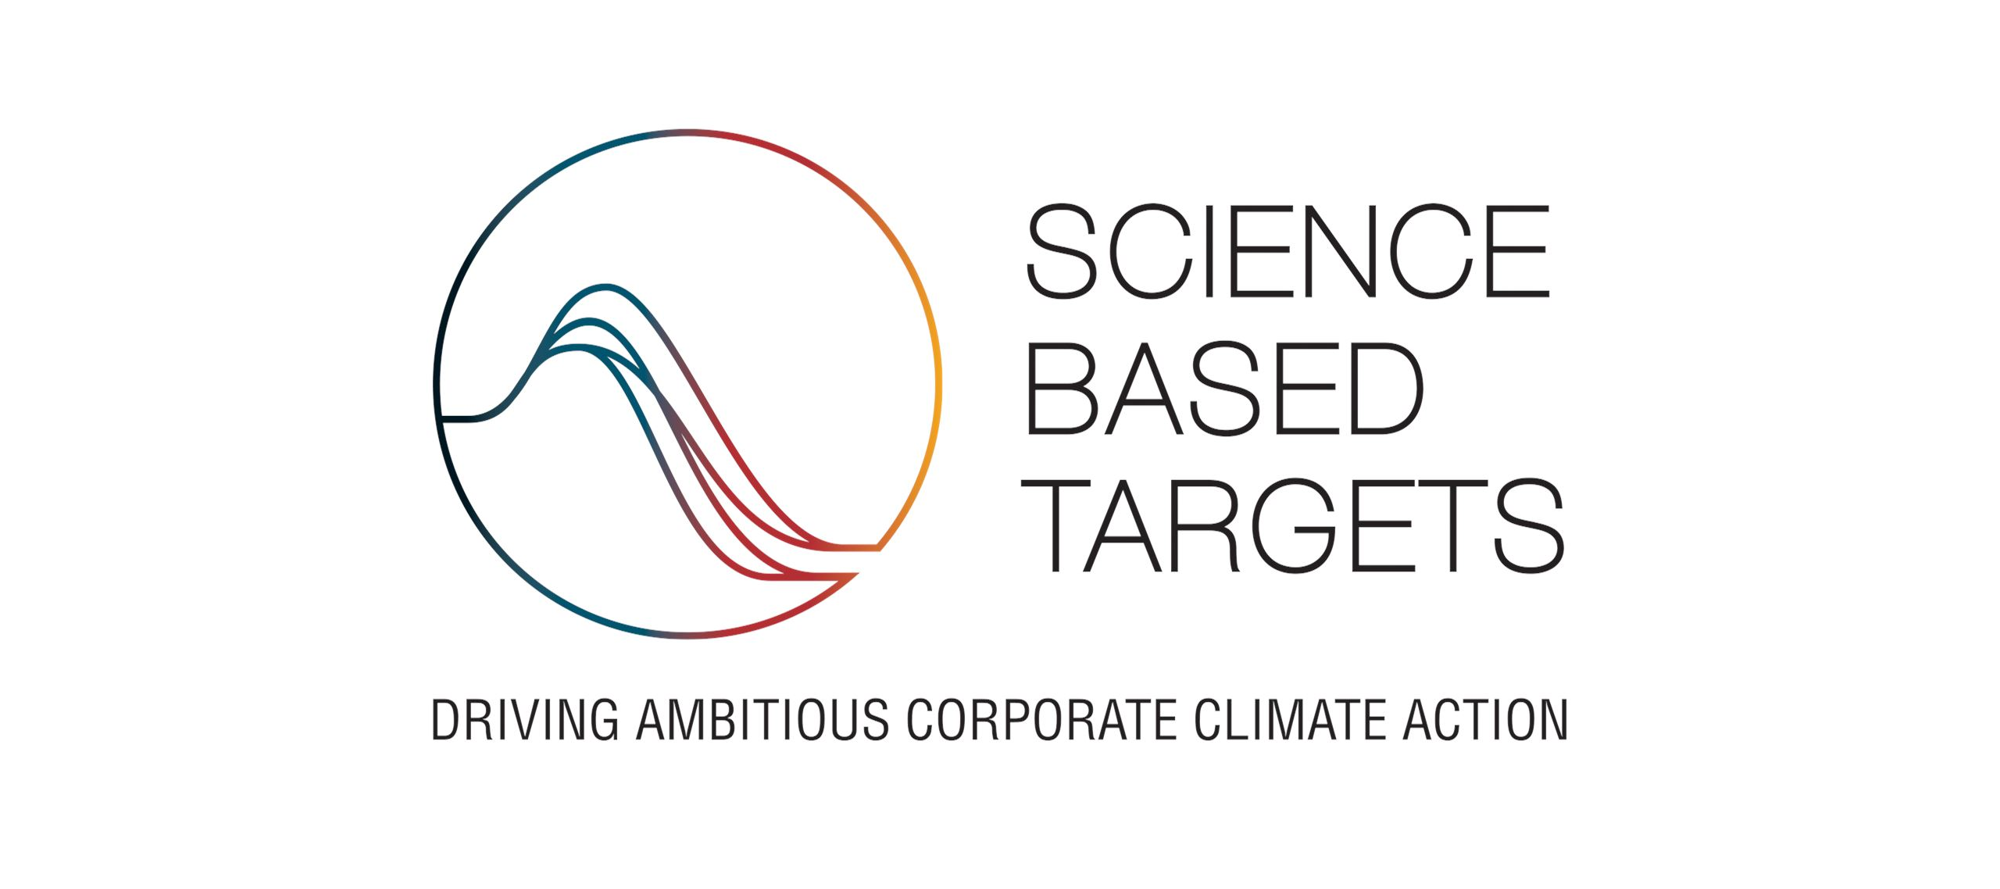 Arcadyan committed to join Science Based Targets initiative (SBTi) to further its carbon reduction resolution.